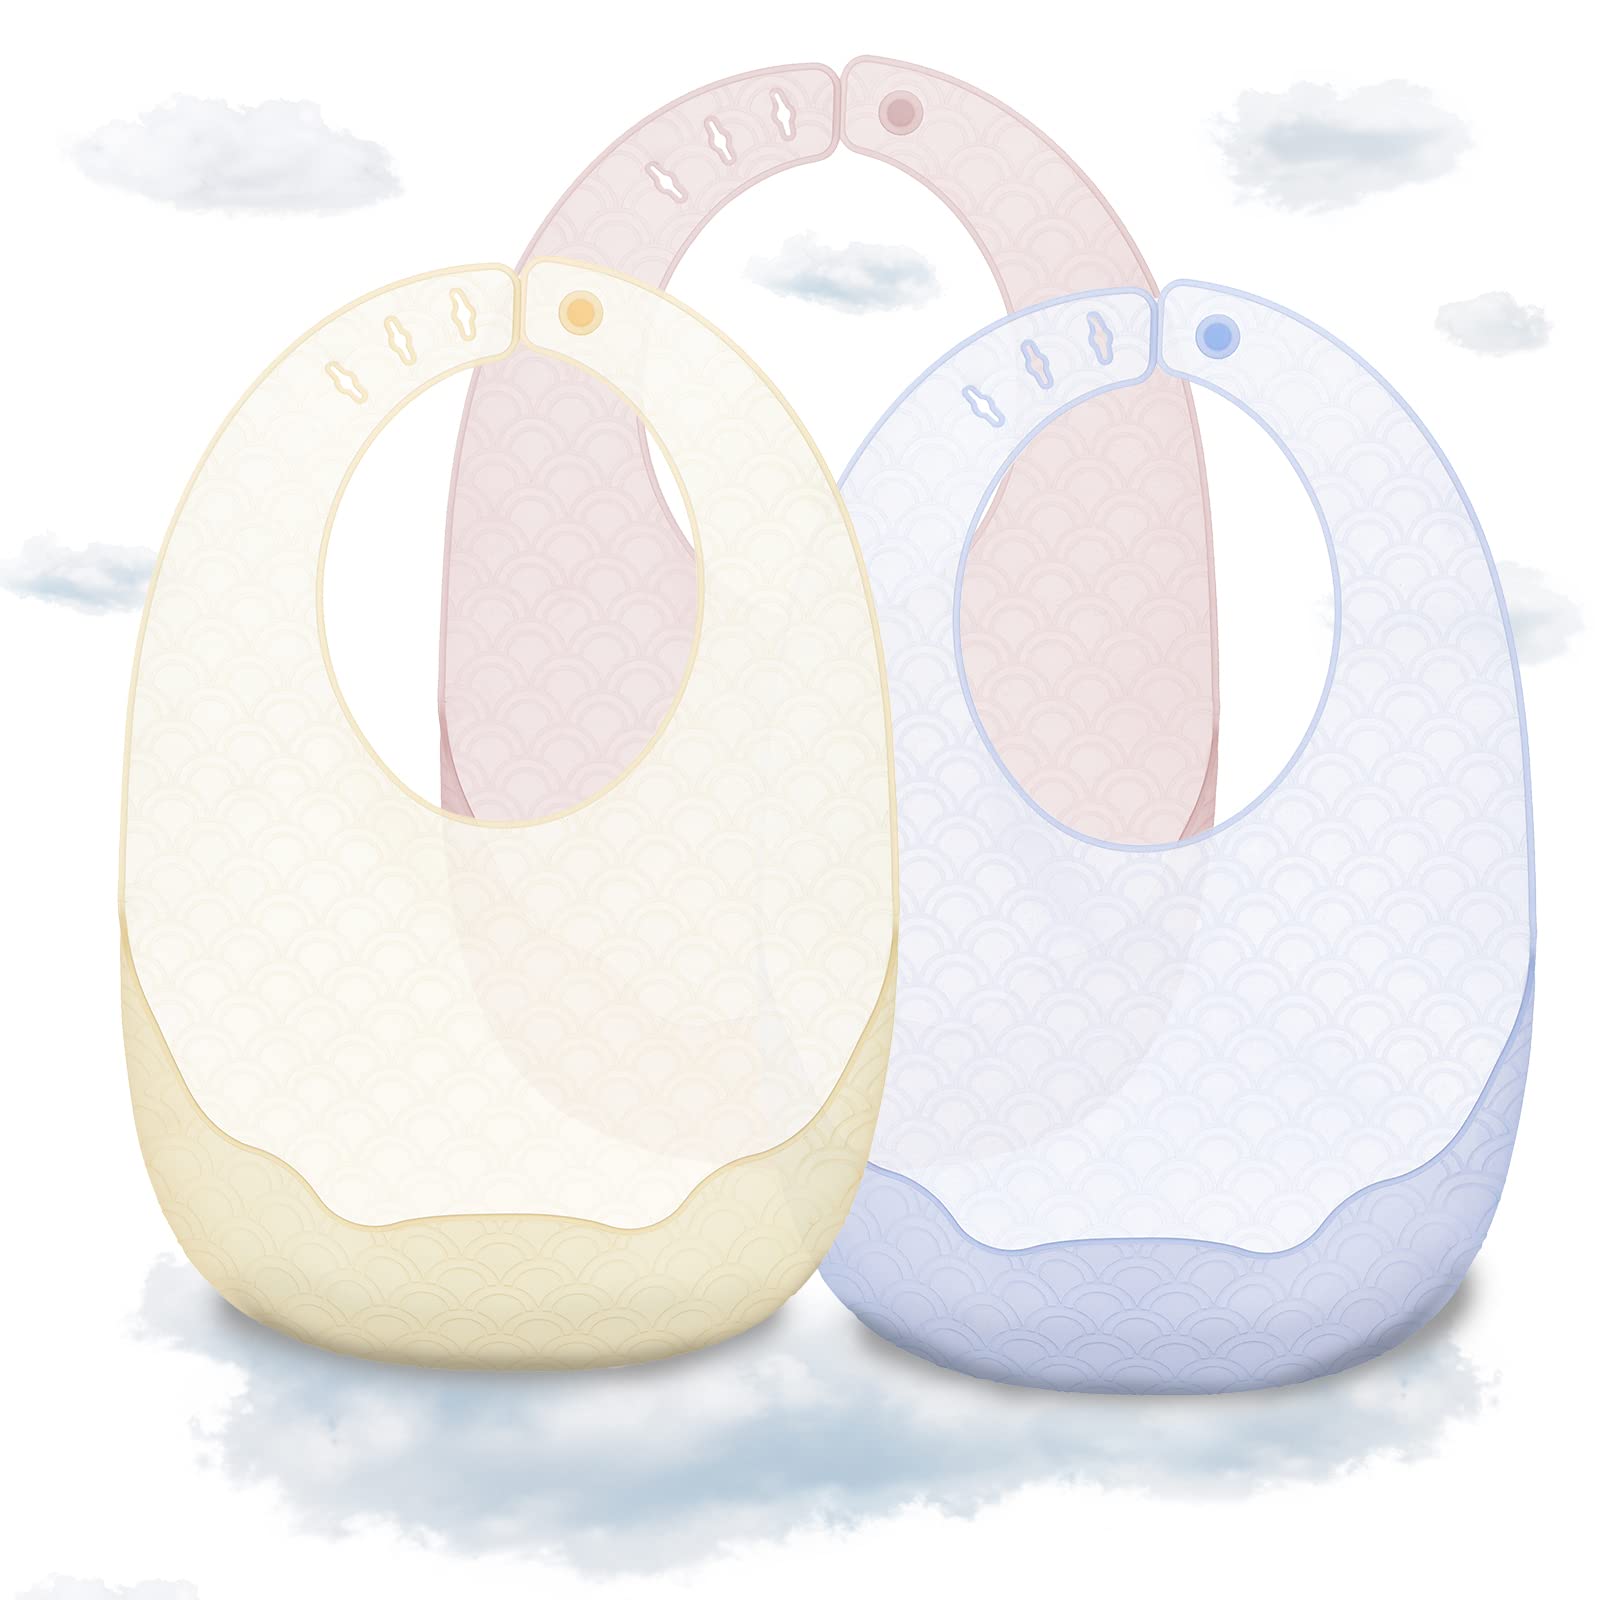 BABELIO Ultra-Thin Set of 3 Silicone Baby Bibs for Babies & Toddlers (6-72 Months), Extra Soft and Durable Silicone Bibs, BPA Free, Waterproof, Unisex (Blue/Light Yellow/Pink)